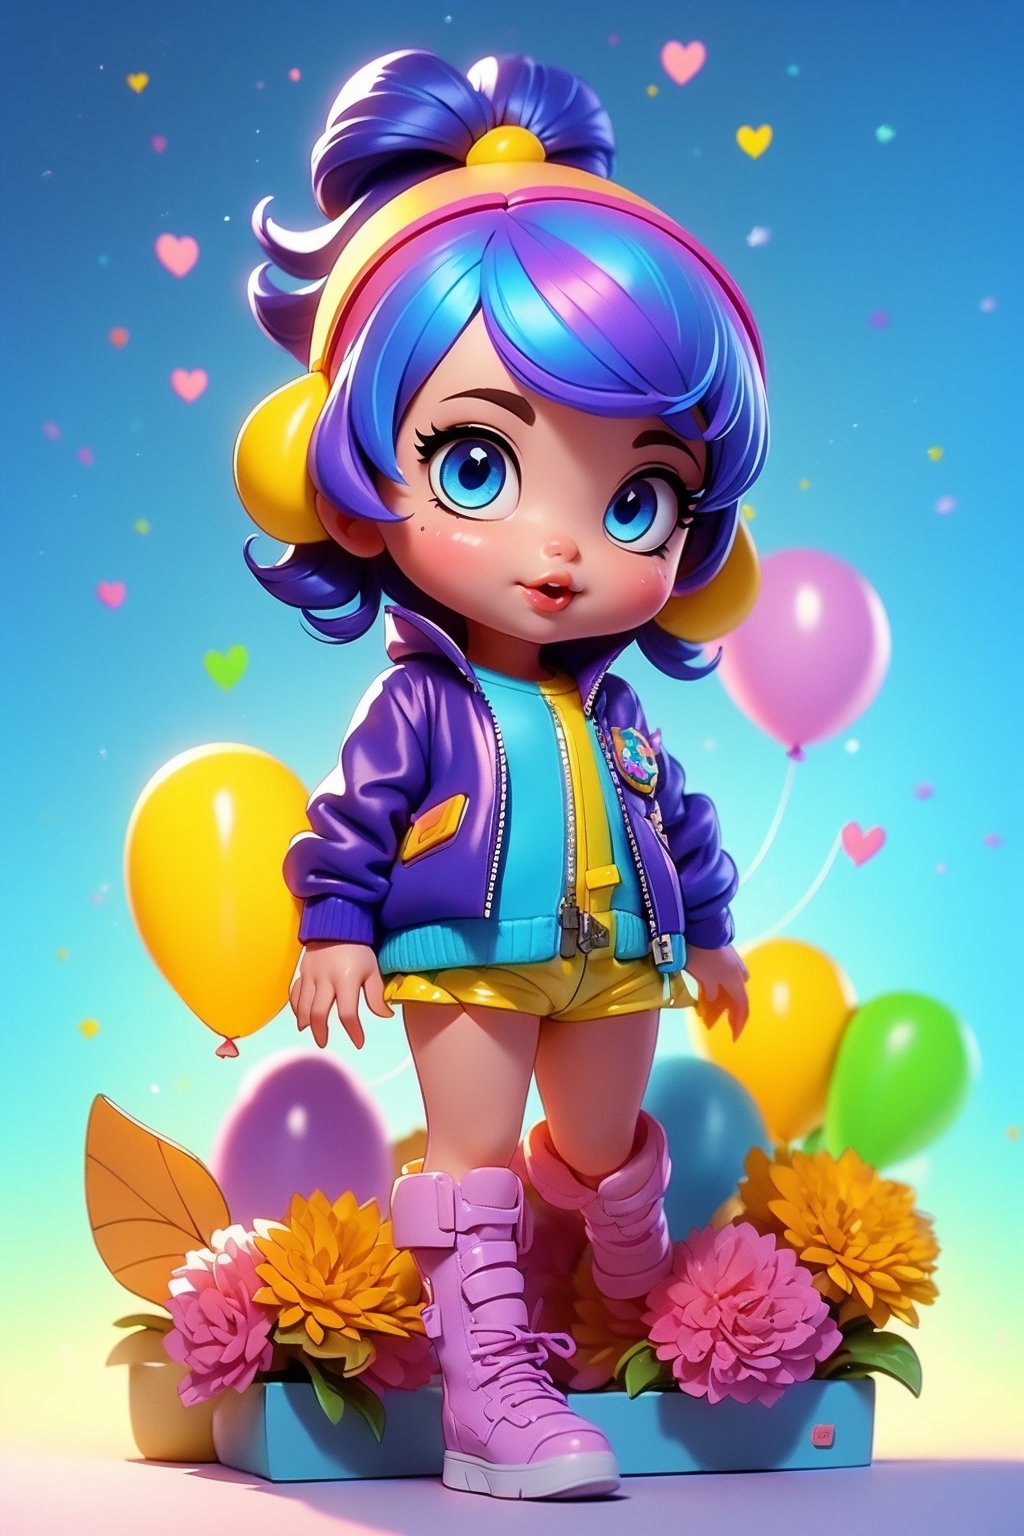 masterpiece, best quality,1 girl, pretty and cute, (terracote color Highlight Hair,colorful hair:1.4), wearing blue and purple sunglasses, rainbow jacket with wings , white sweater, many colored balloons, doll face, ponytail braid, perfect blue detail eyes, delicate face, perfect cg, HD quality,, sky ,violet boots, Blythe doll style 